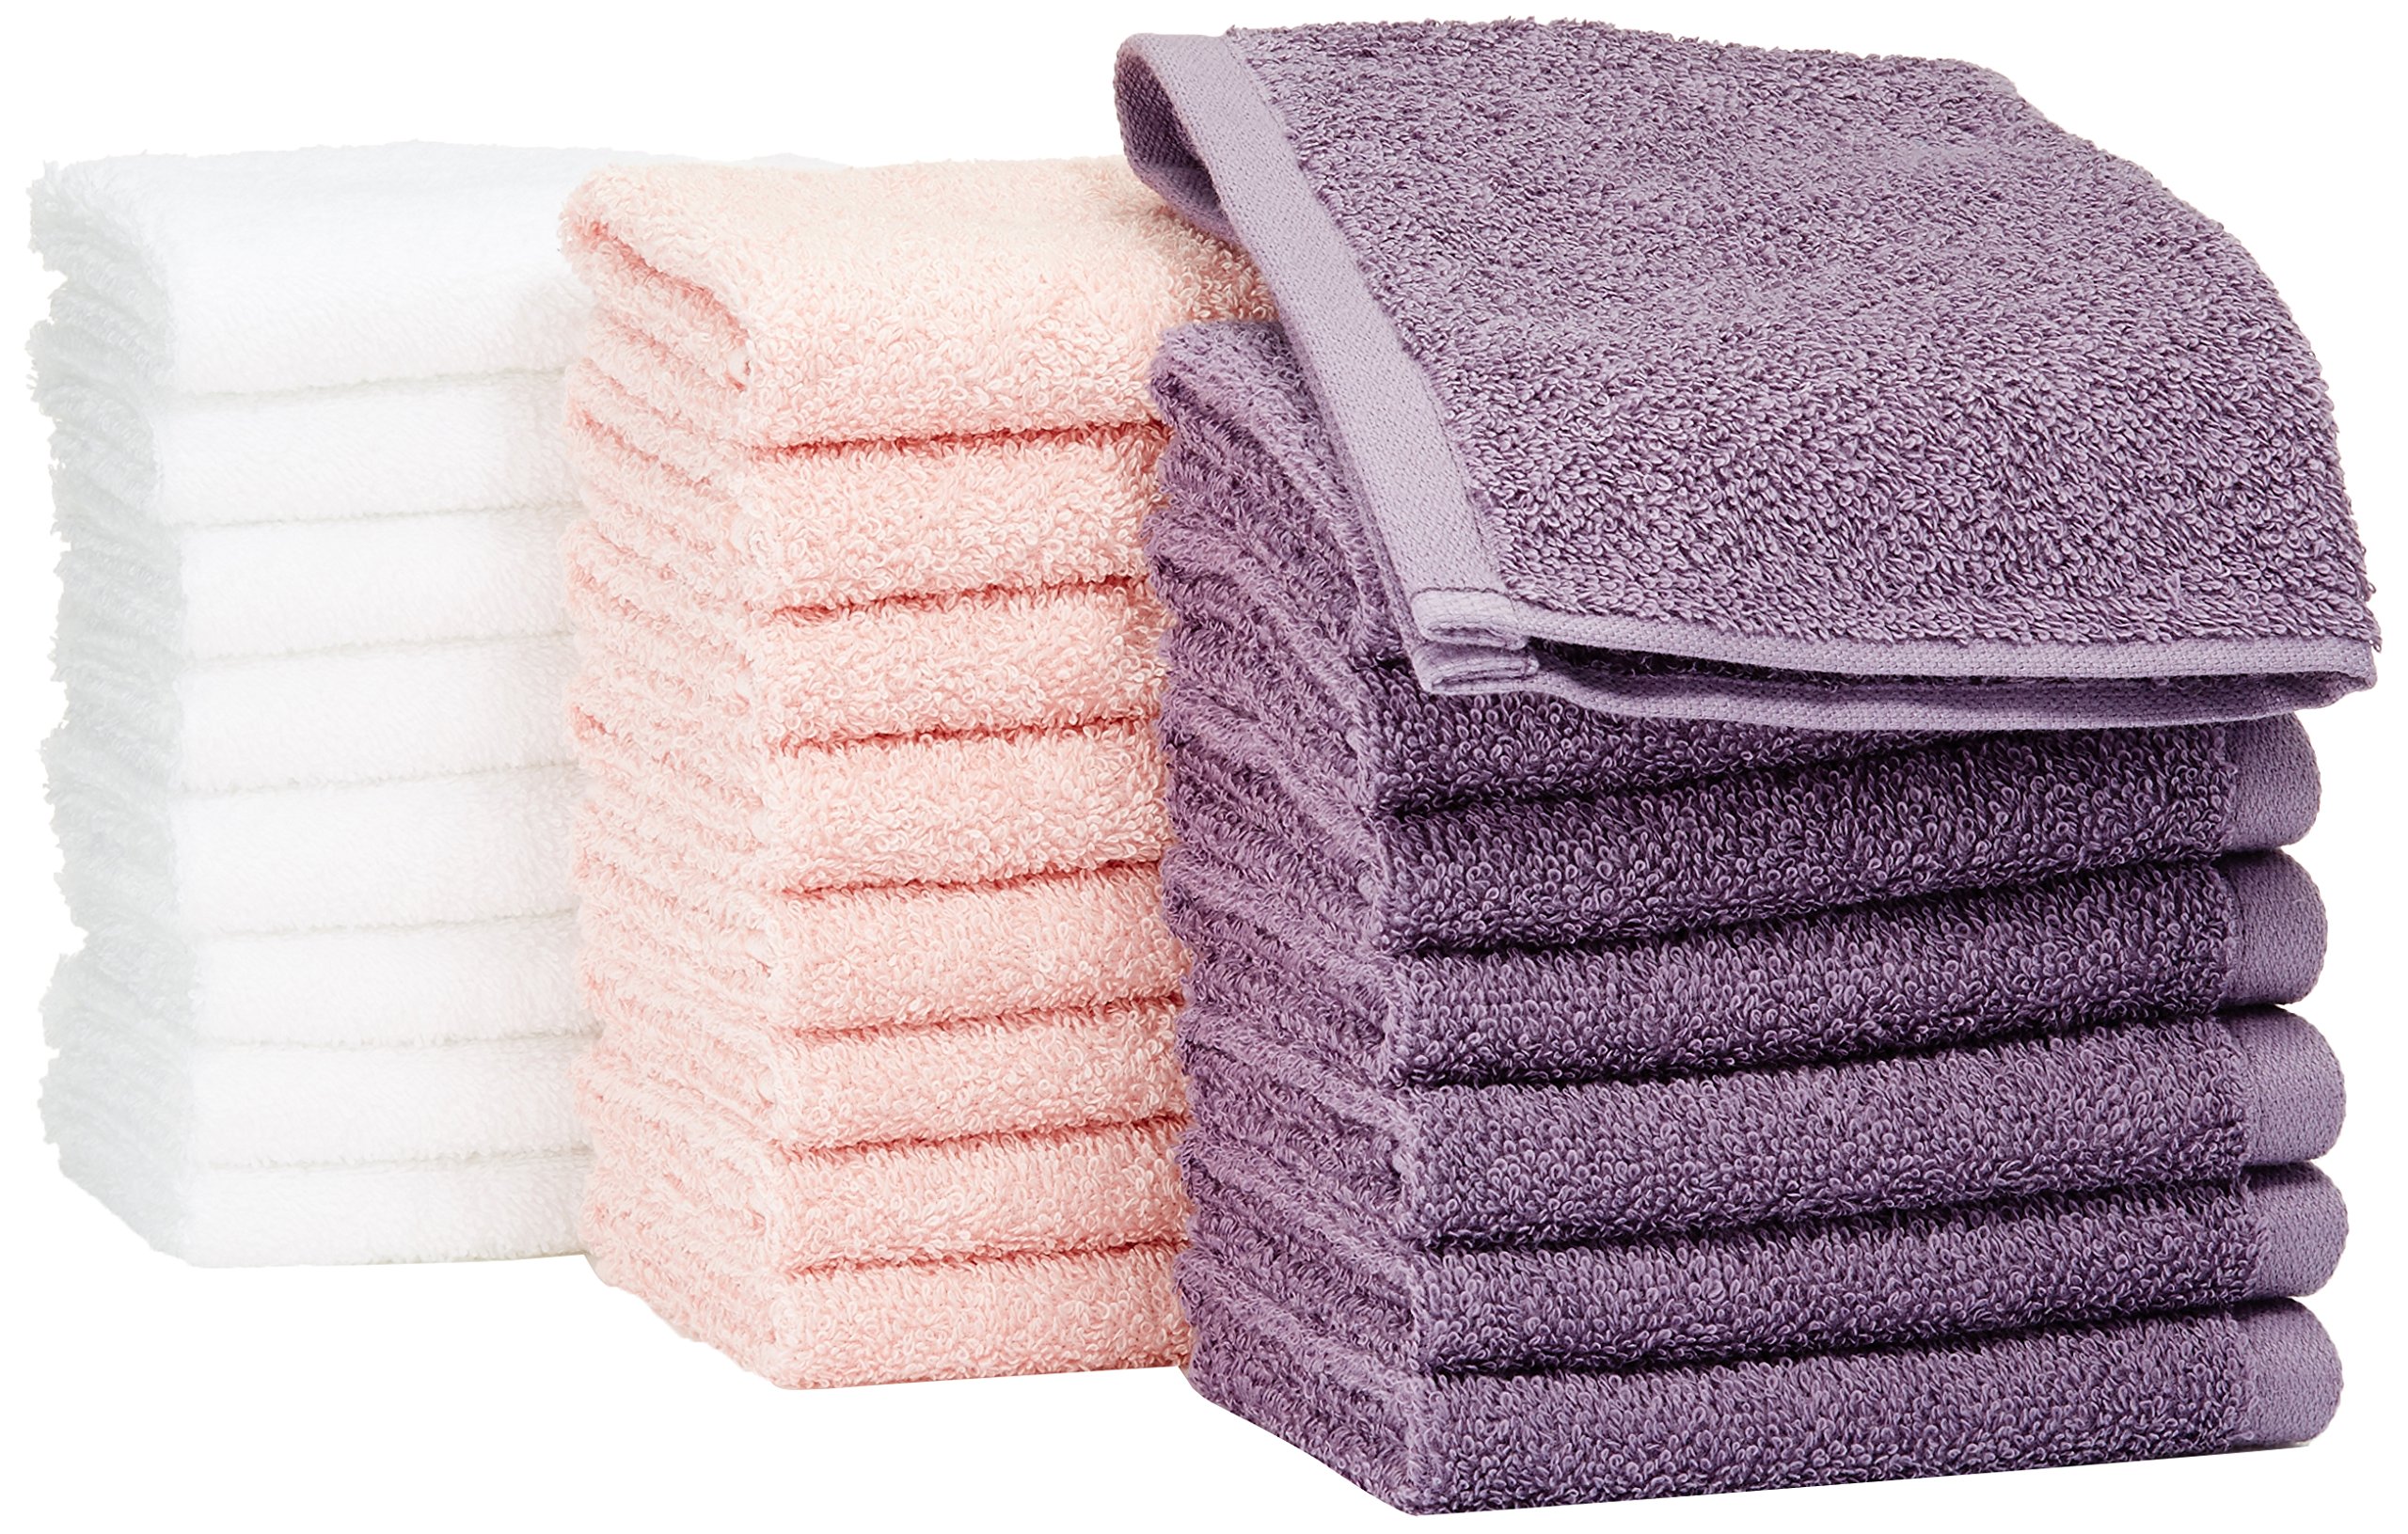 Amazon Basics Fast Drying, Extra Absorbent, Terry Cotton Washcloths - Pack of 24, Petal Pink/Lavender/White, 12 x 12-Inch